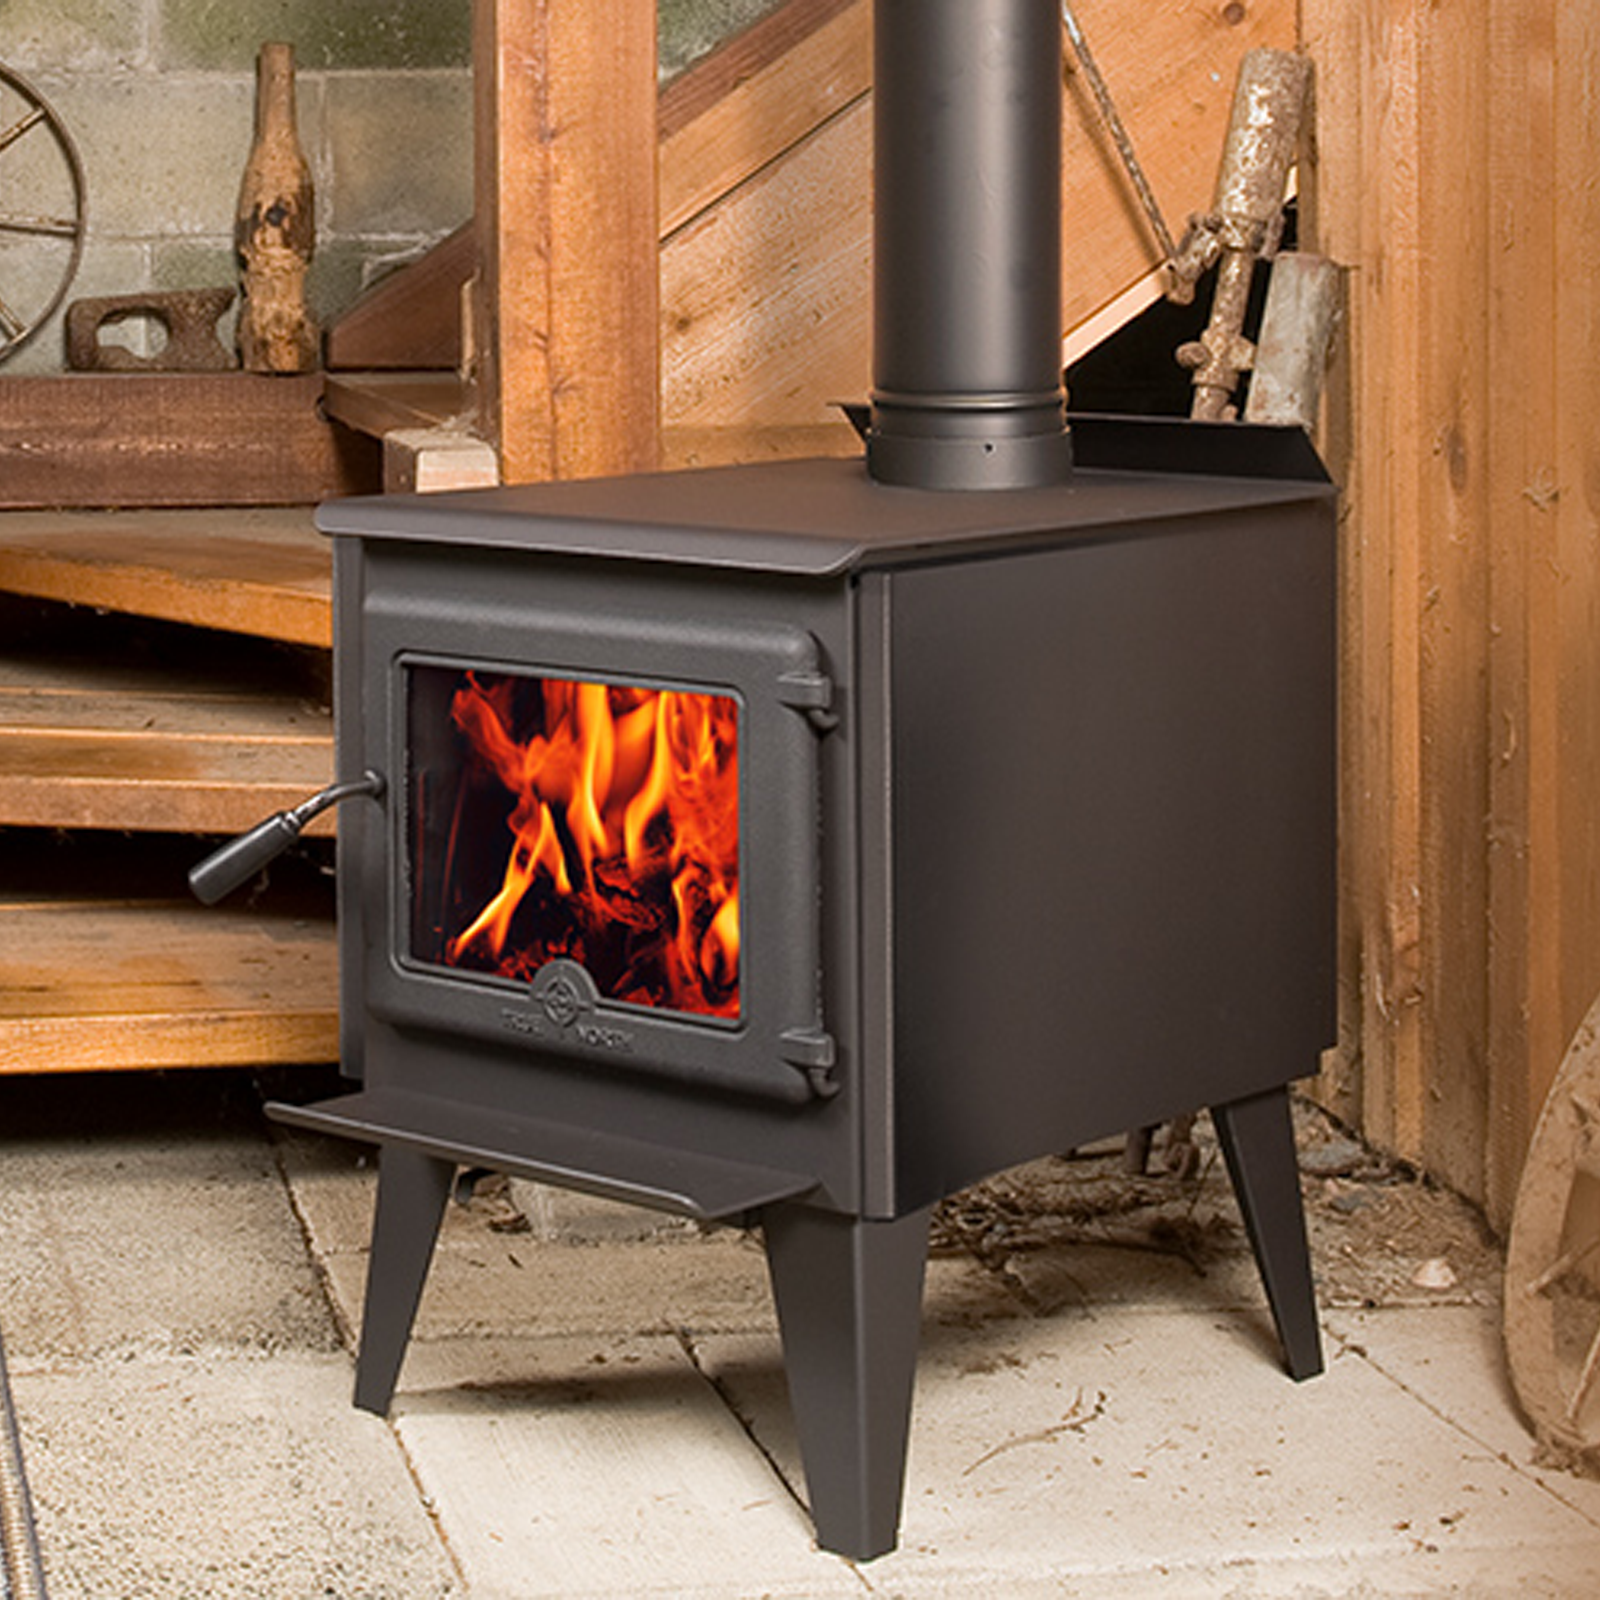 Discount Stove - Stove Parts  Wood heater, Wood stove, Woodburning stove  fireplace